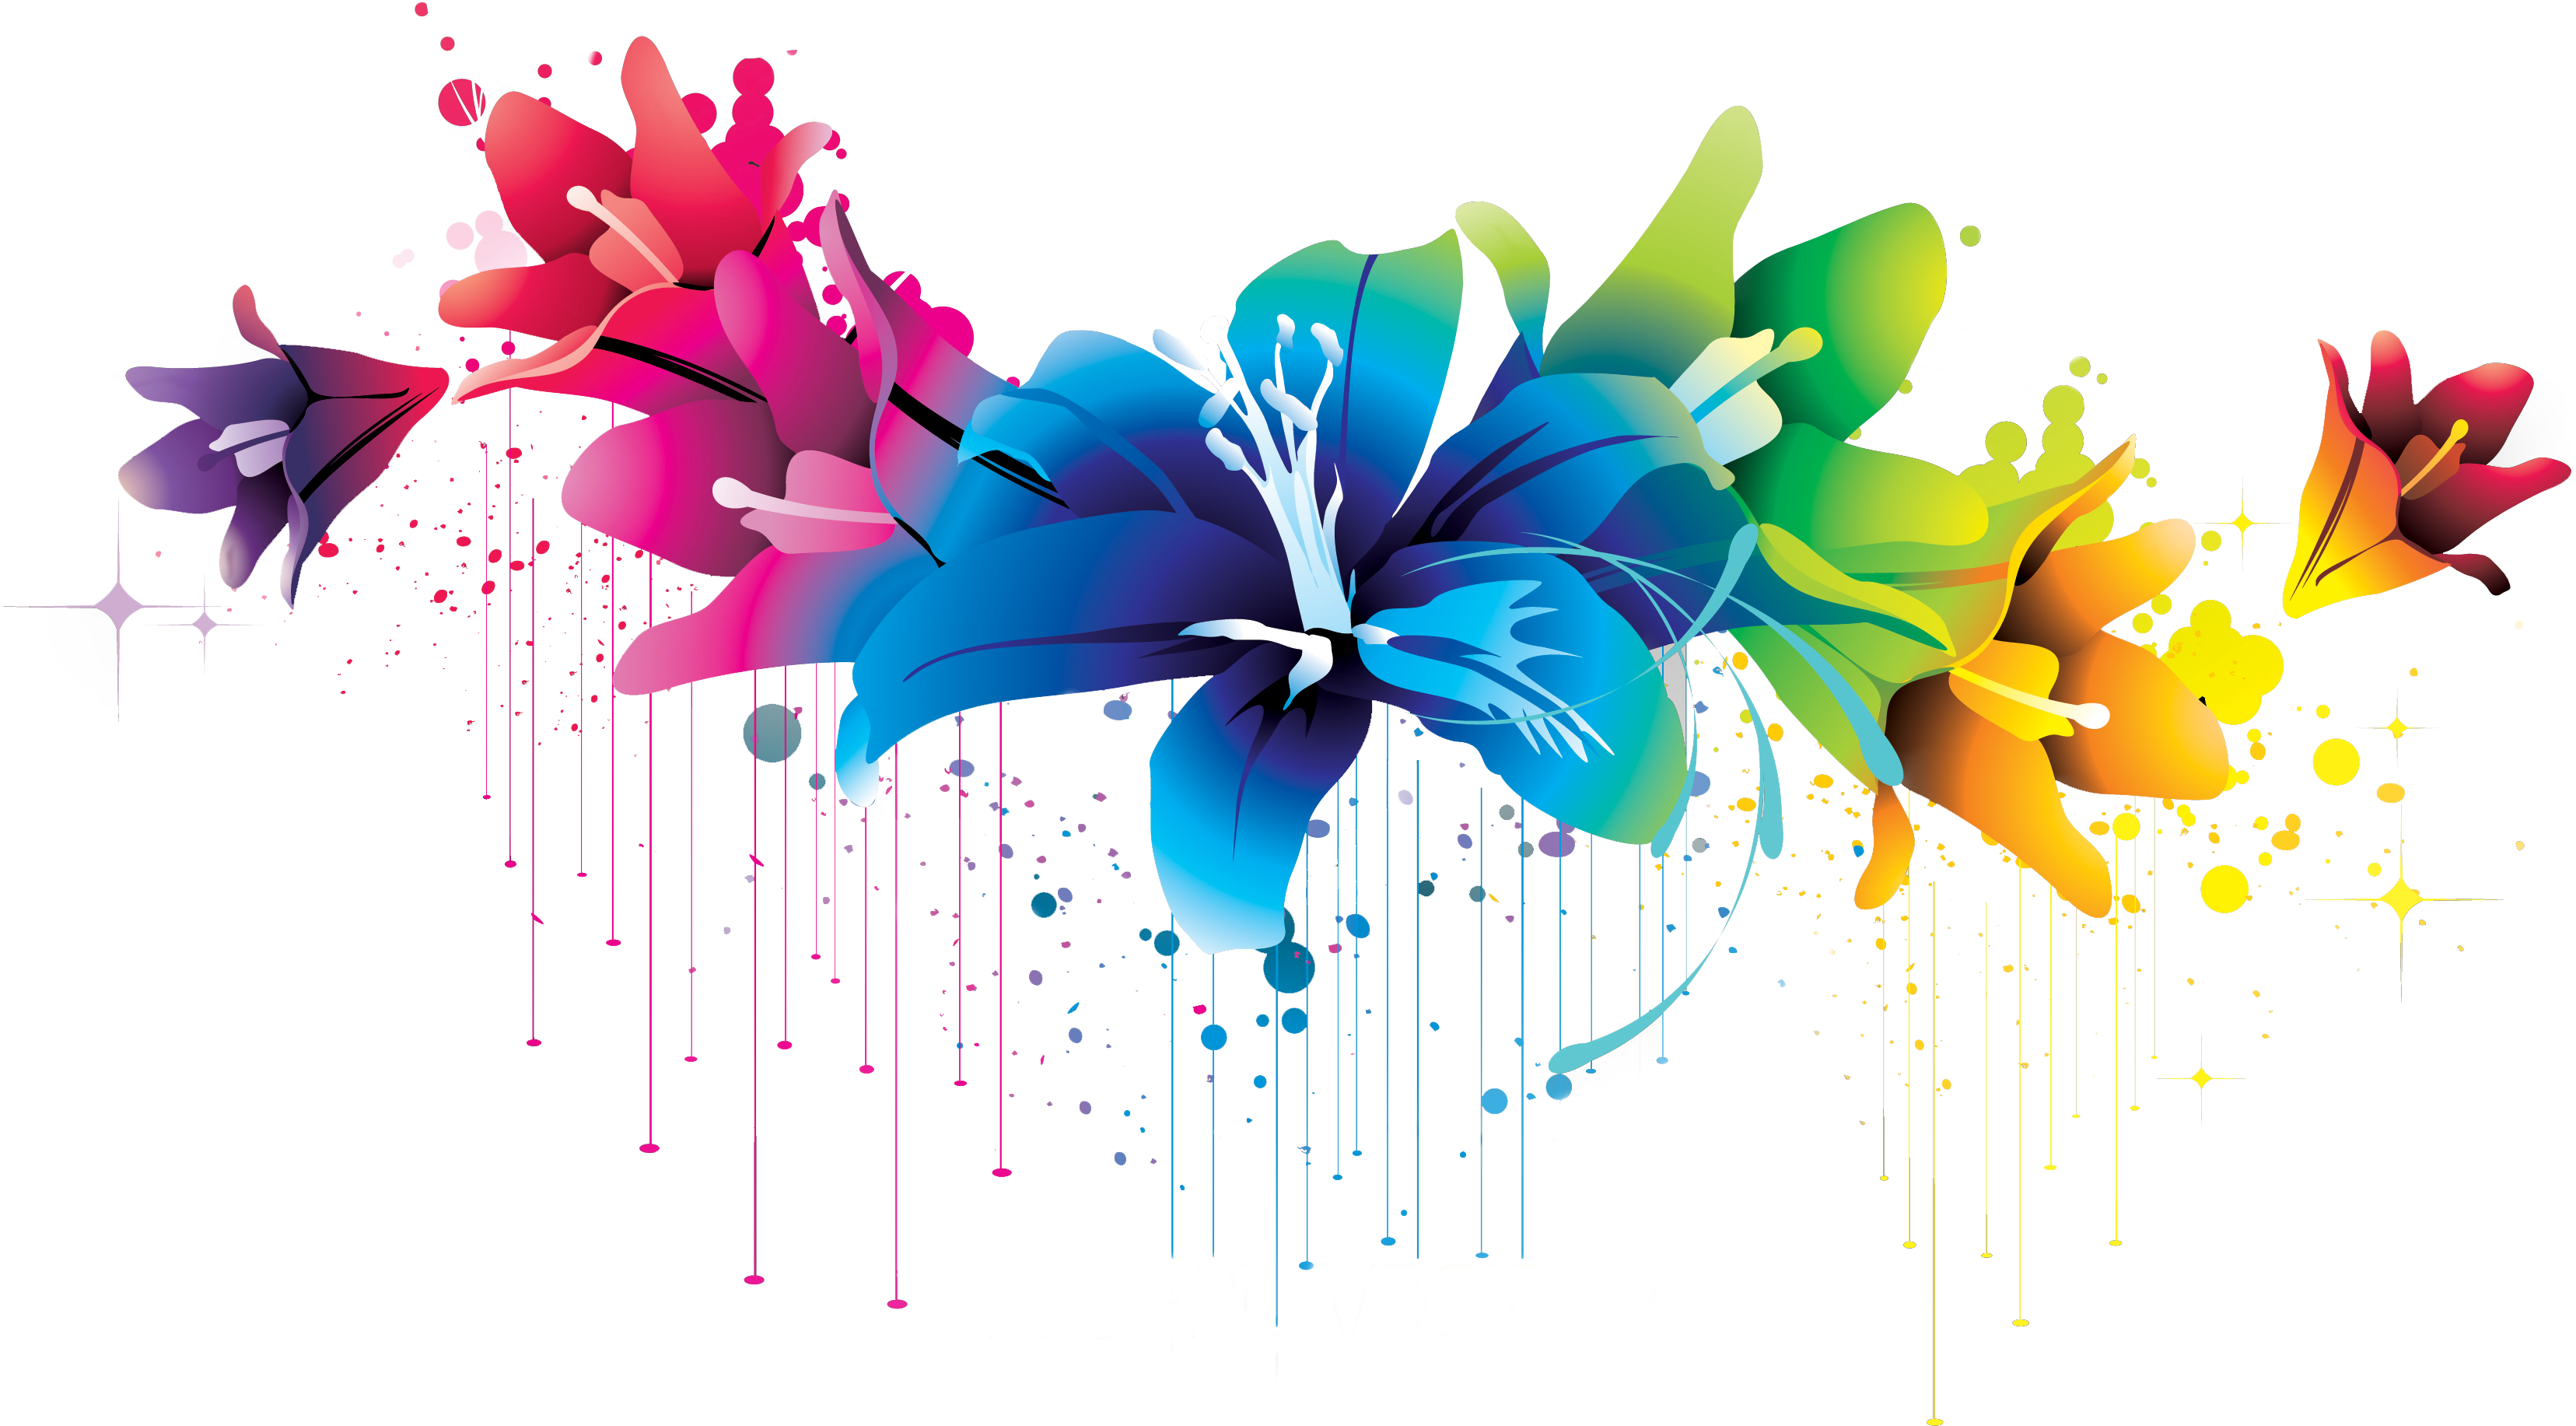 Download Colorful Flowers Image HQ PNG Image | FreePNGImg